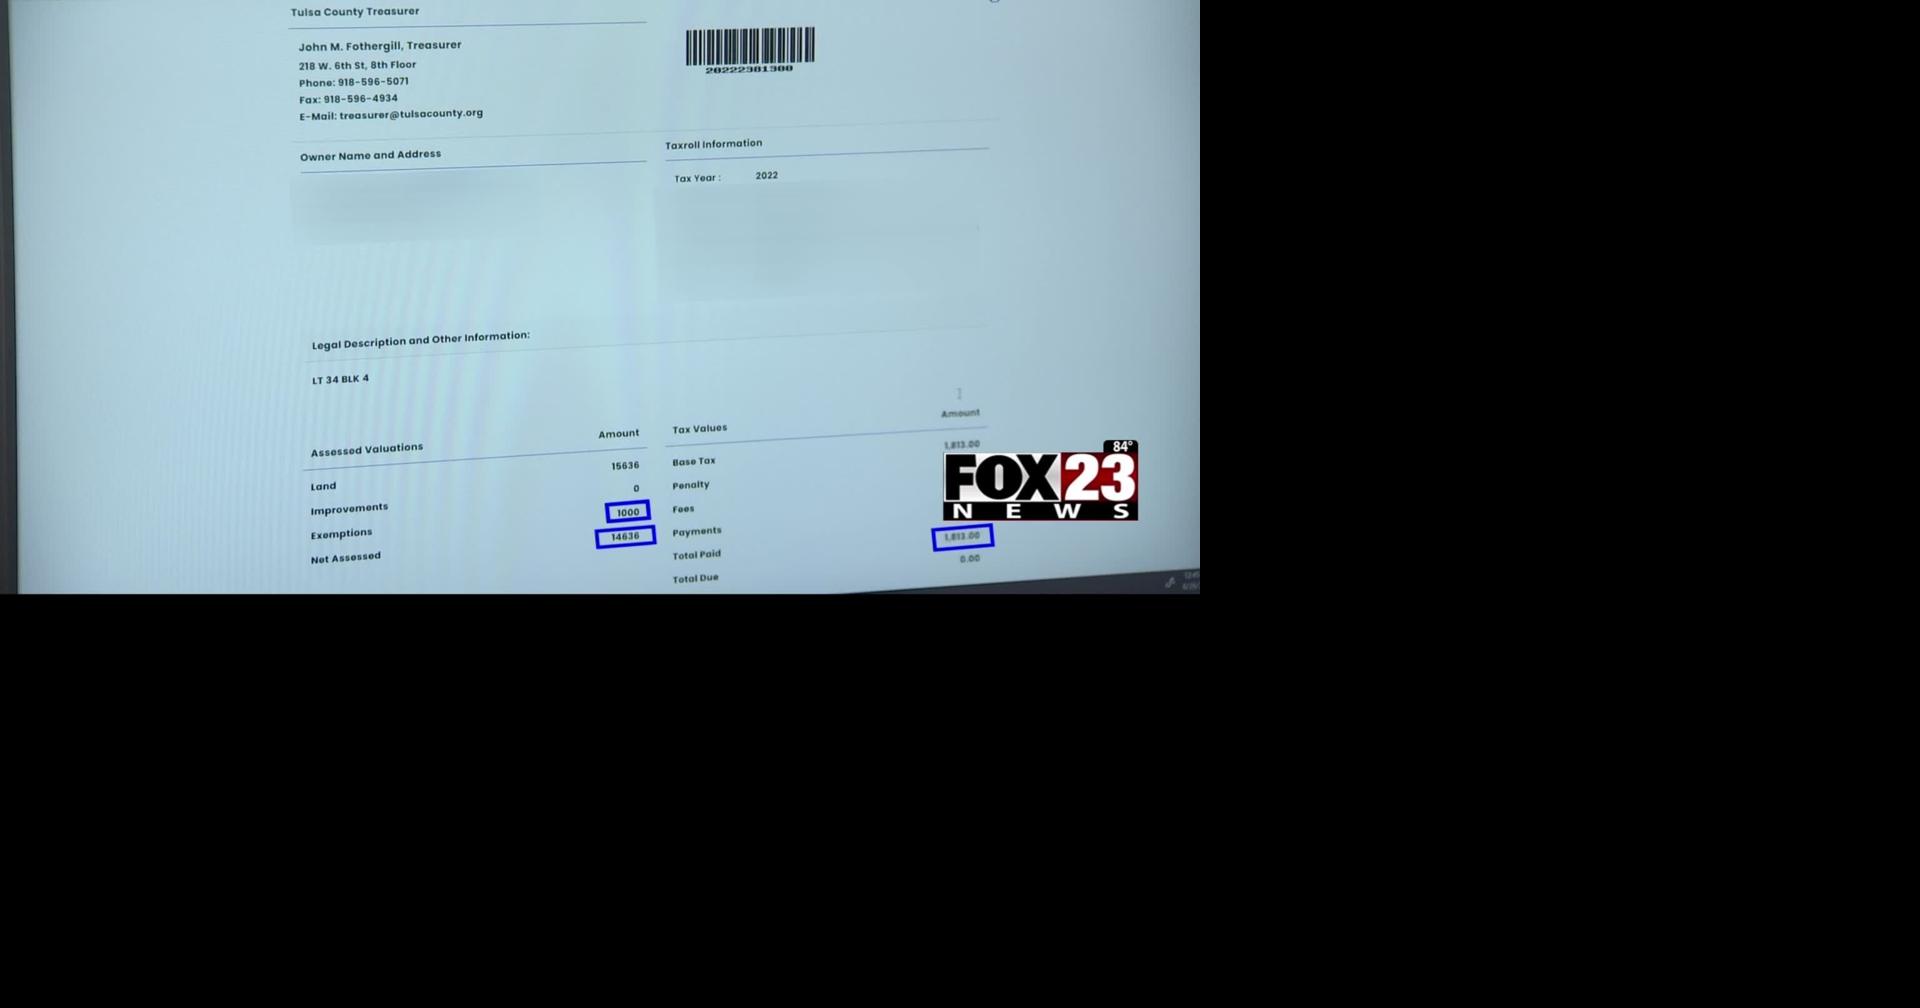 Video Tulsa County tax forms changing for first time in decades News